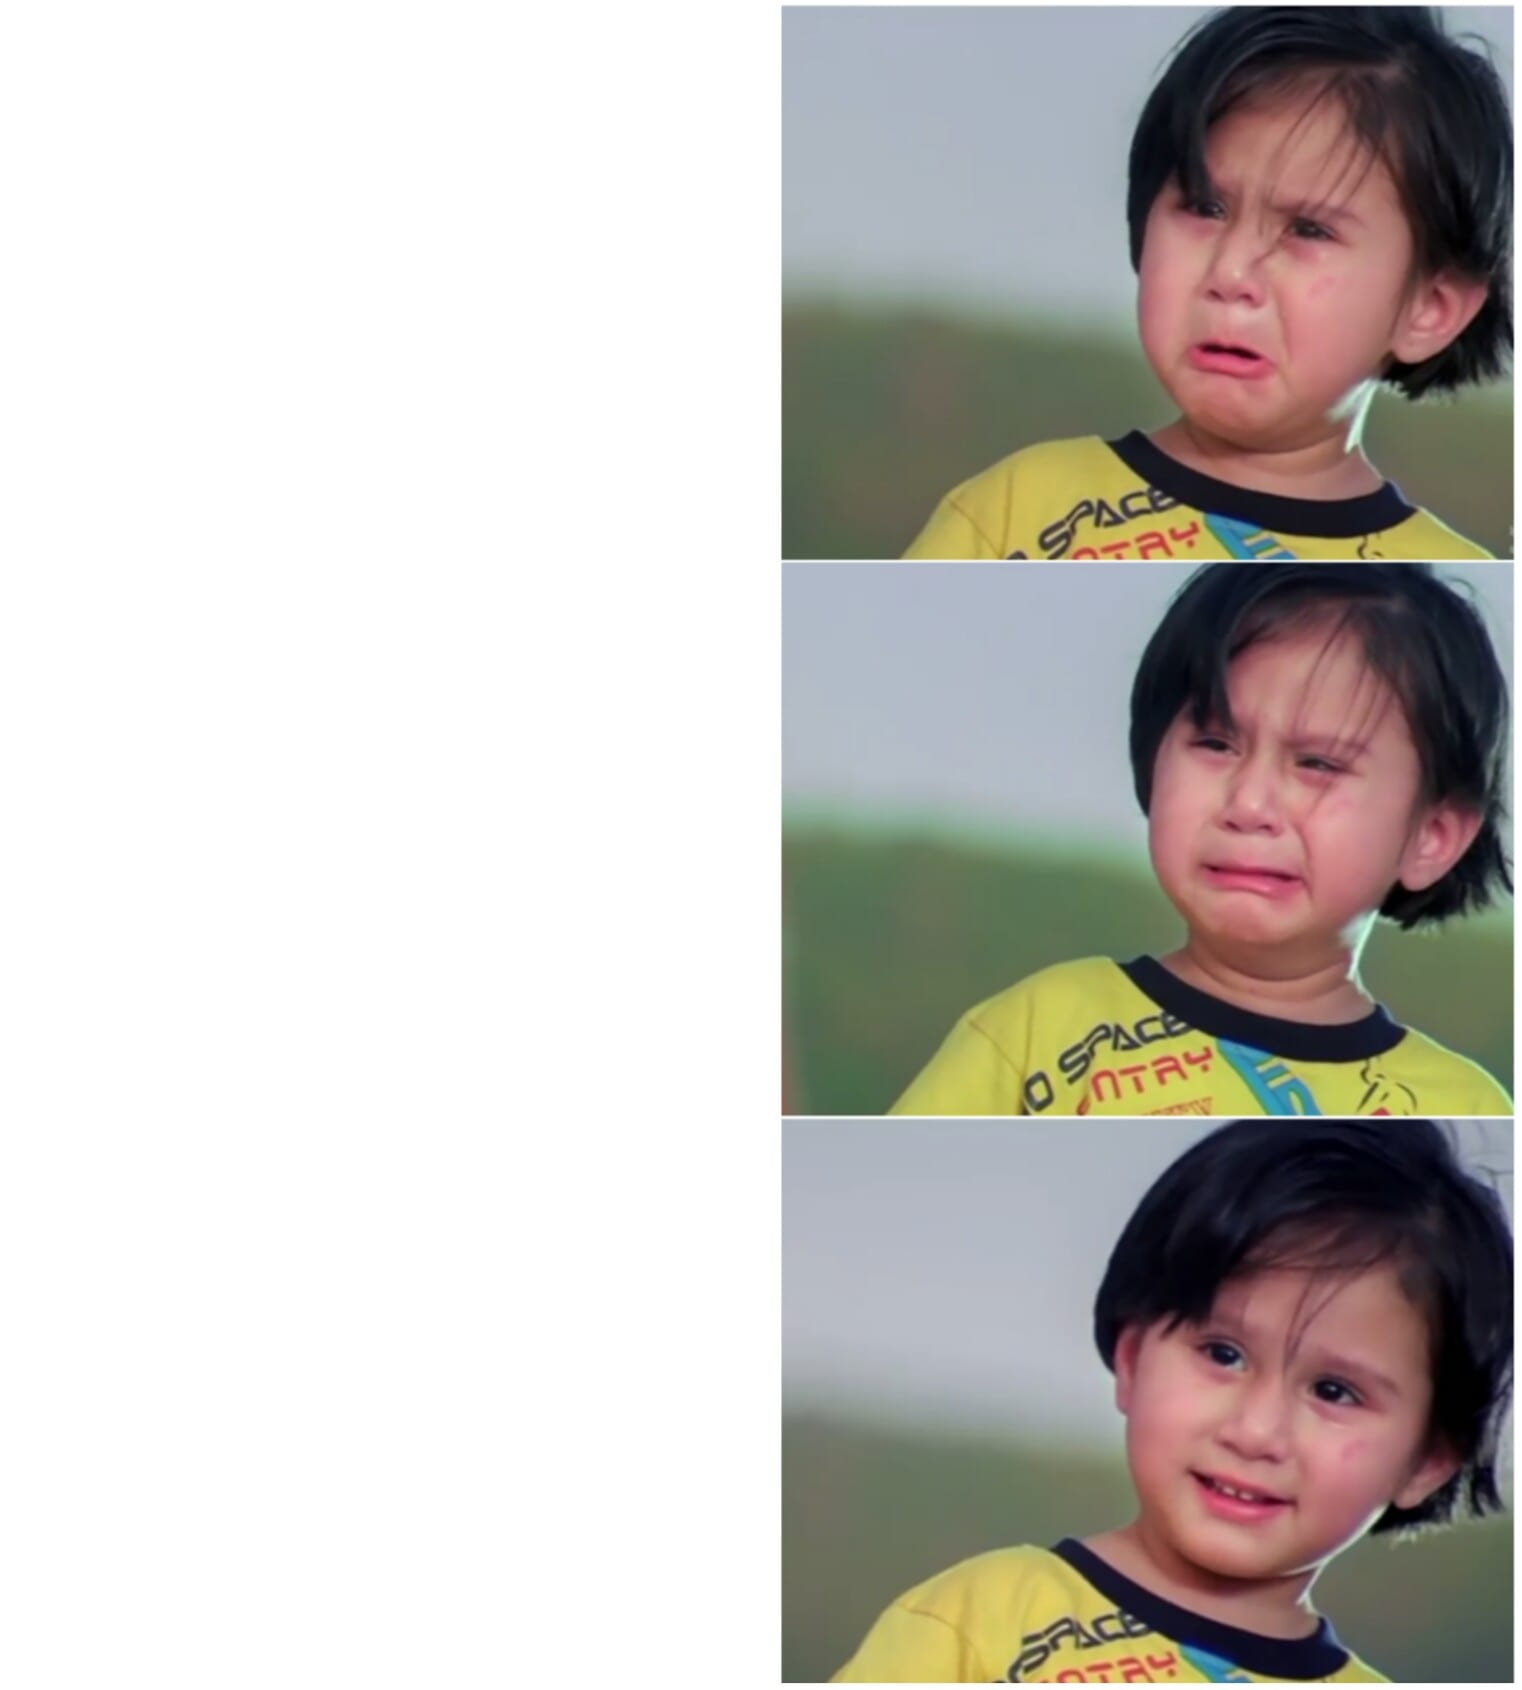 dhamaal small girl crying then smiling meme template